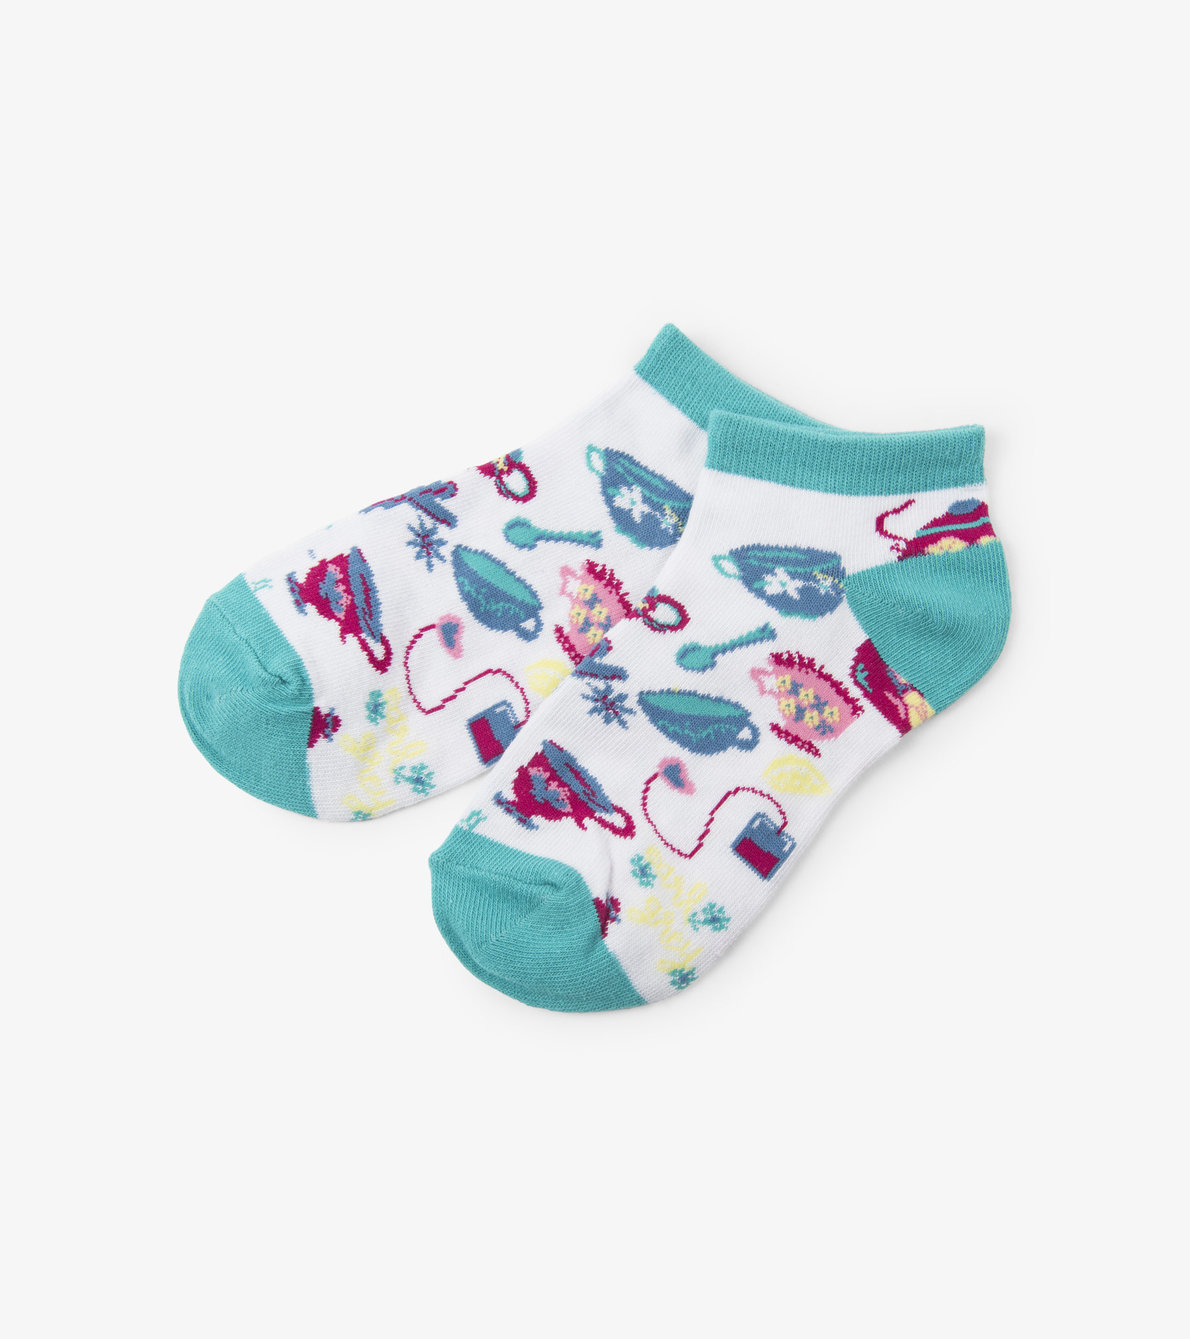 View larger image of Tea Time Women's Ankle Socks